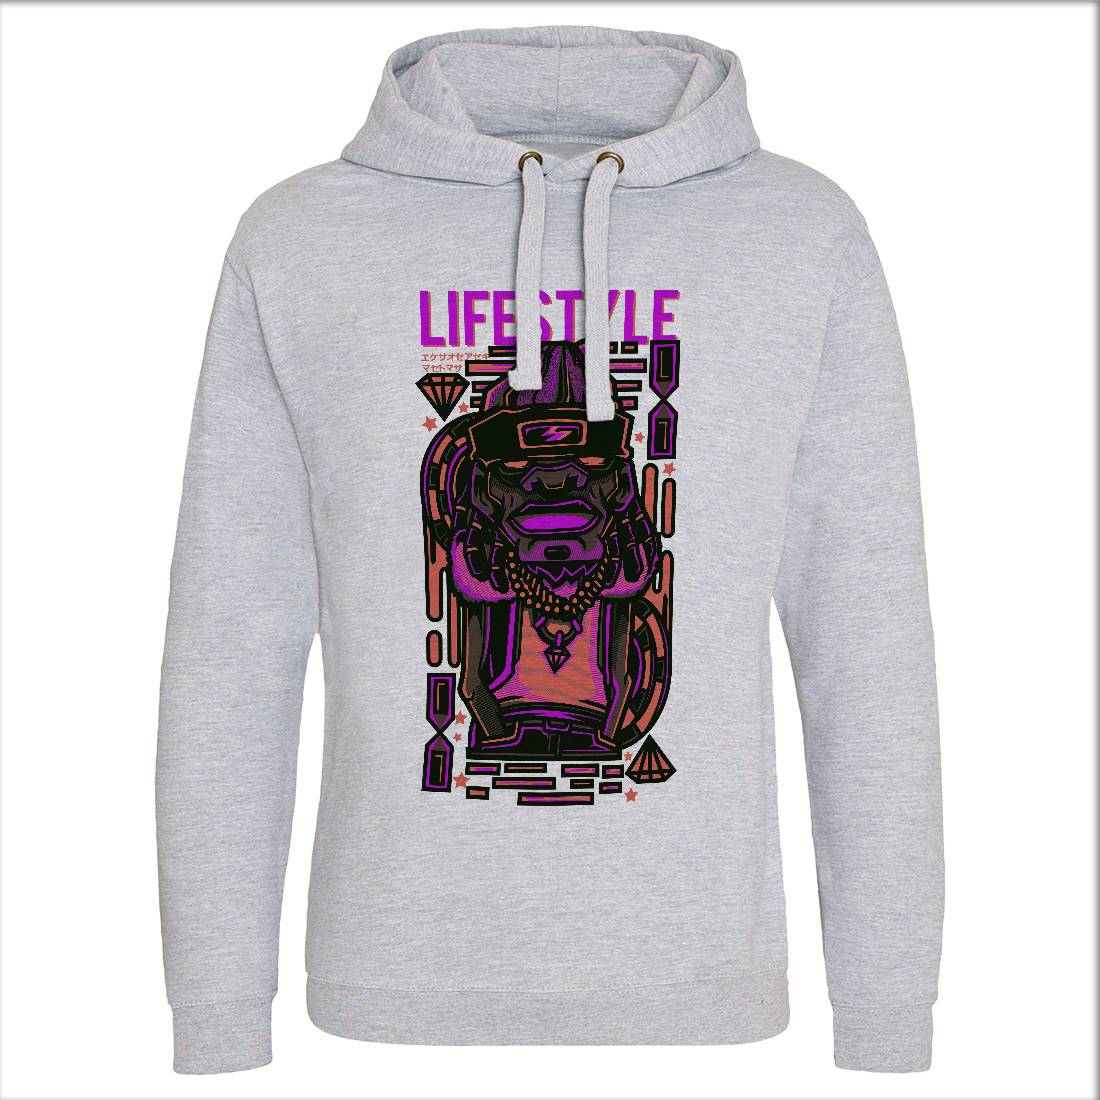 Life Style Mens Hoodie Without Pocket Retro D636